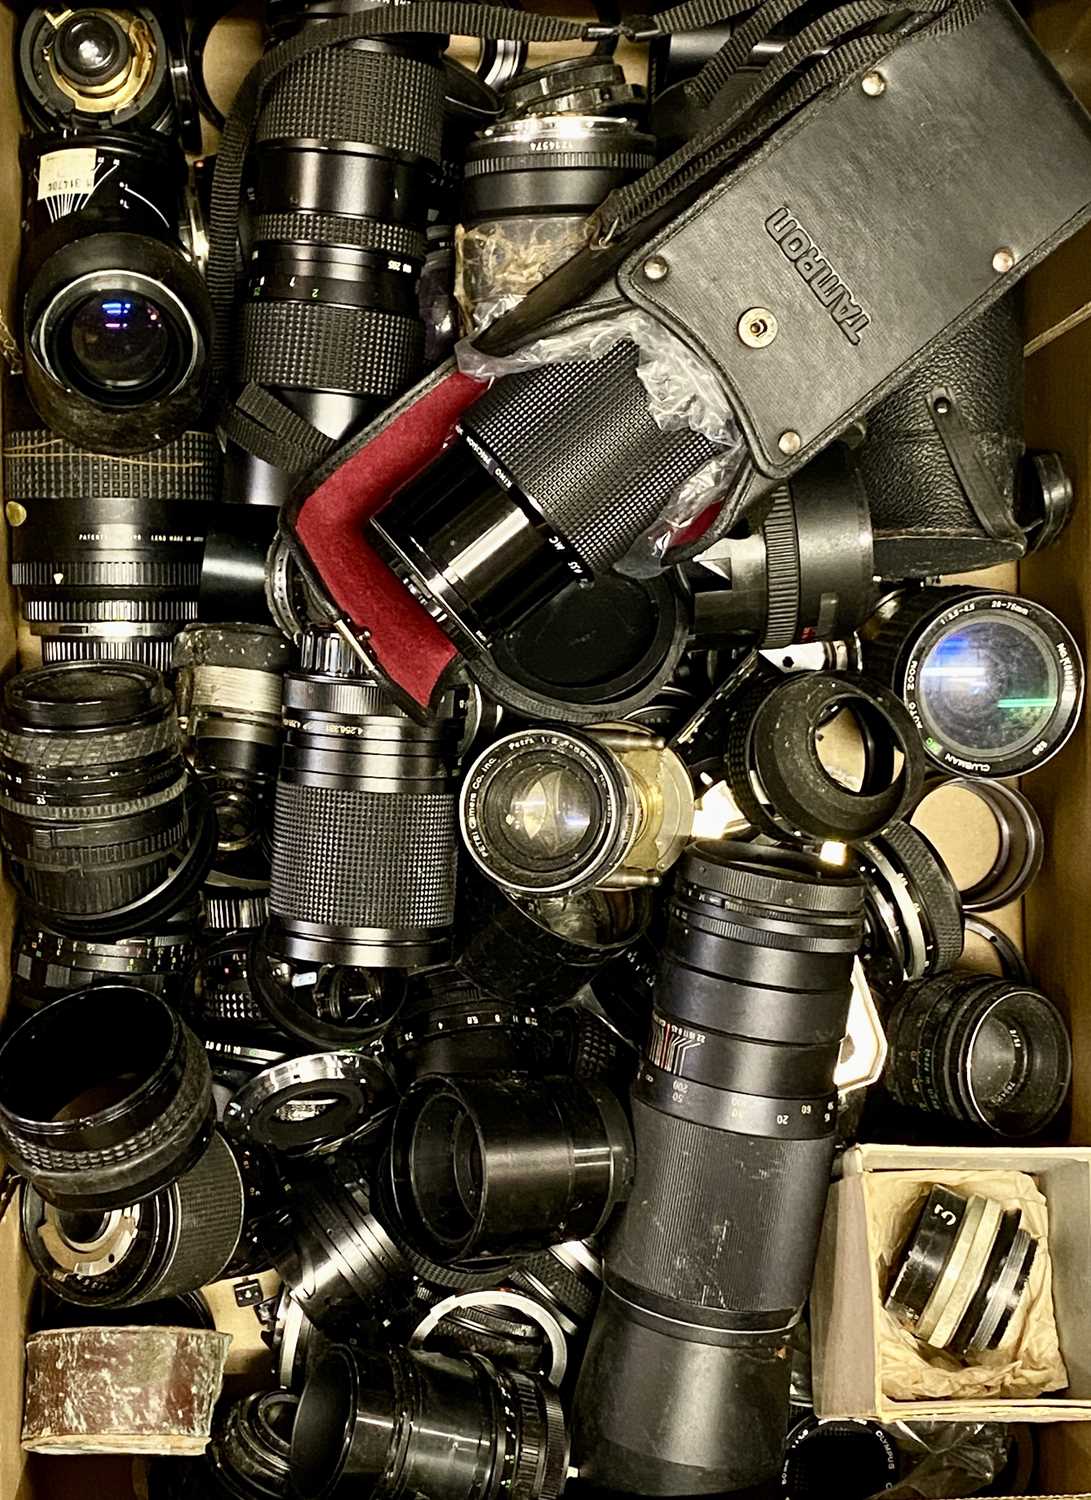 LARGE QUANTITY OF CAMERAS & ACCESSORIES, including bodies, lenses, flashes etc. contained within - Image 2 of 5